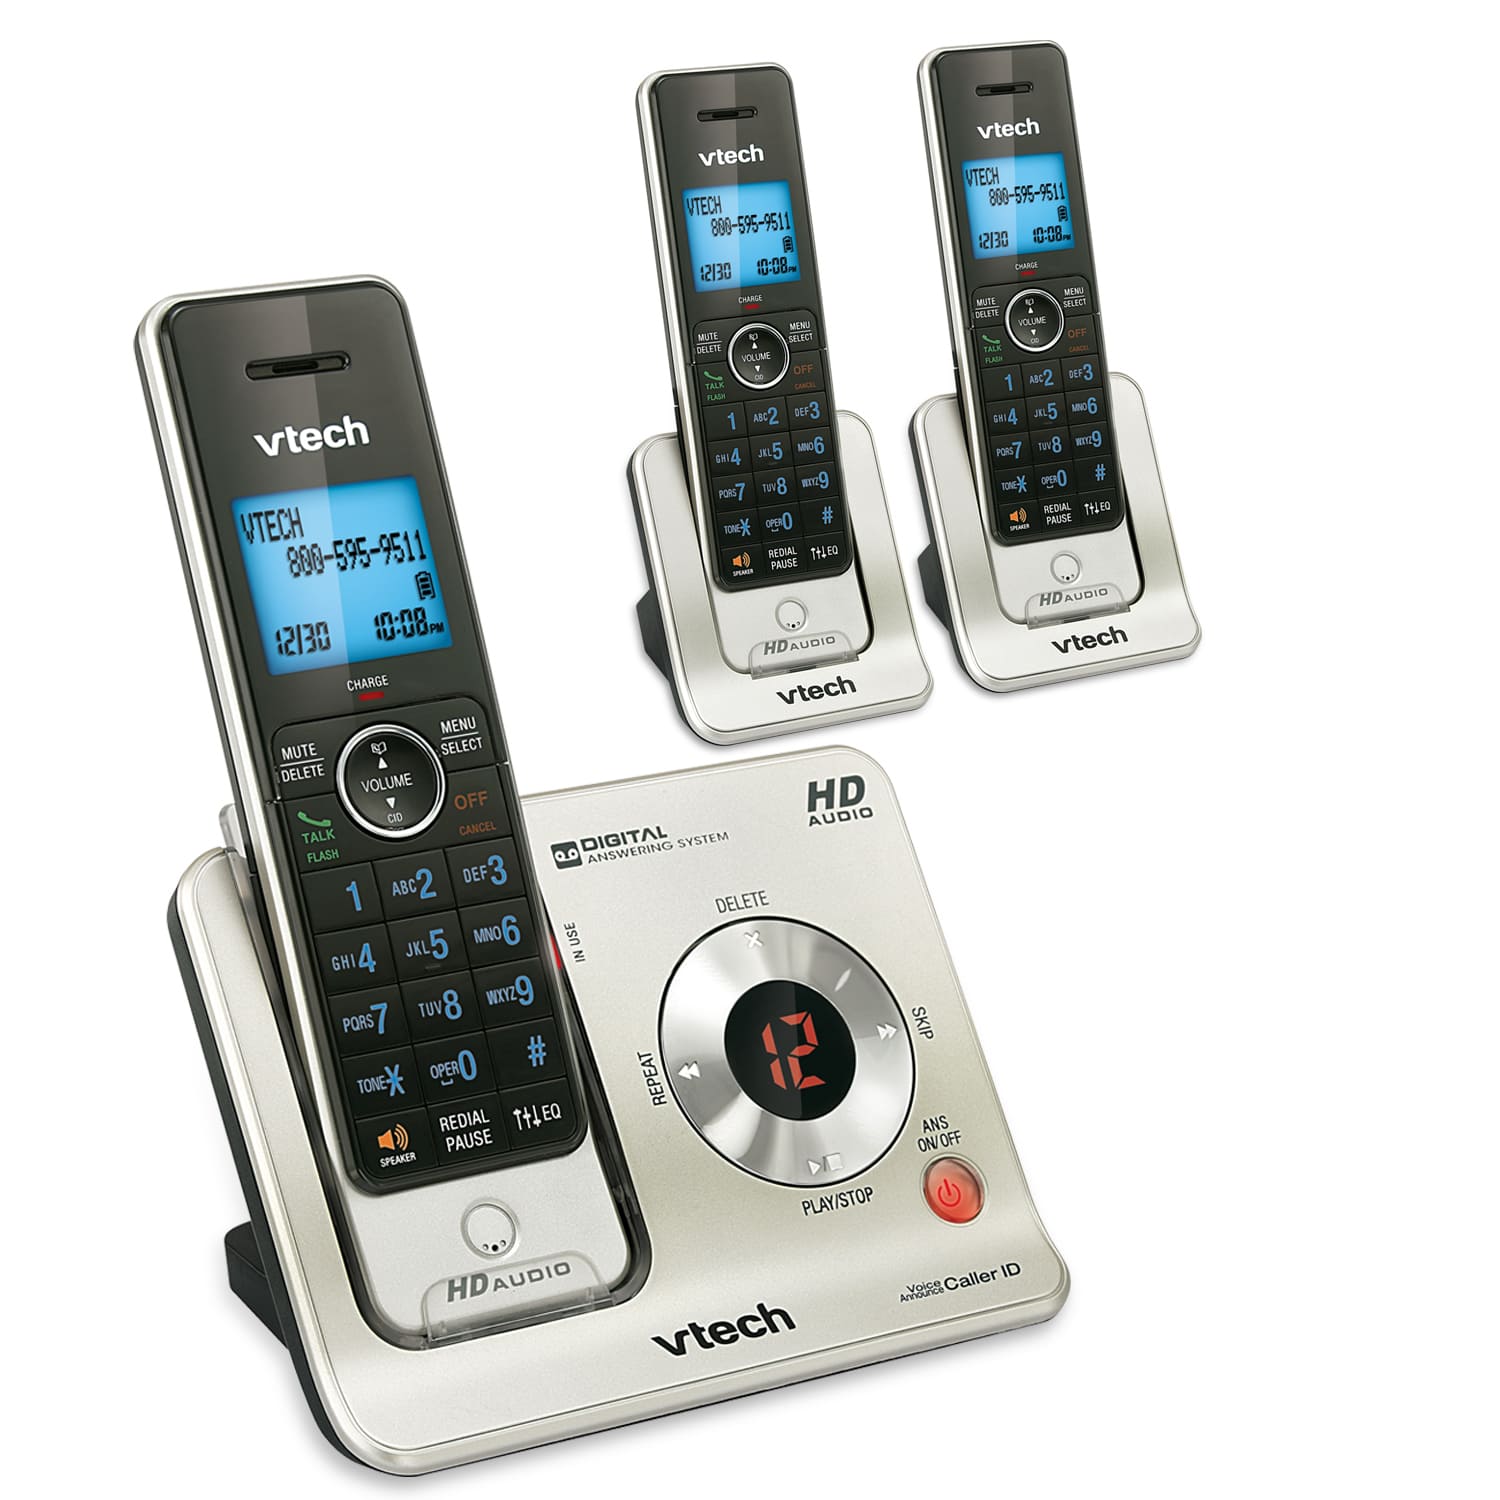 4 Handset Answering System with Caller ID/Call Waiting